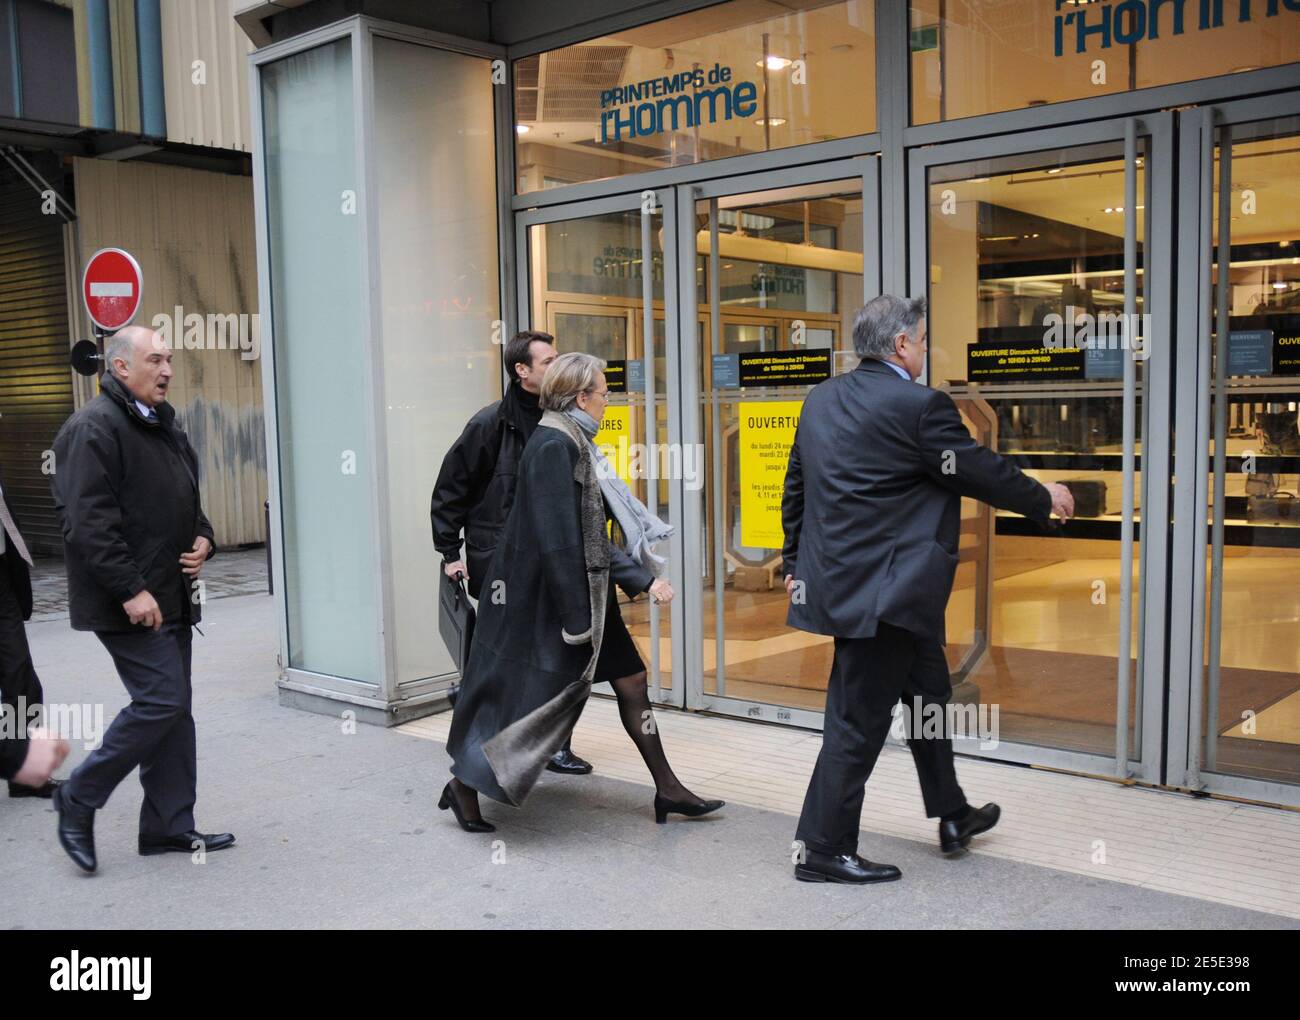 EXCLUSIVE - Minister of Interior Michele Alliot-Marie arriving at Printemps department store in Paris, France on December 16, 2008. Police neutralized explosives discovered in Printemps department store. Photo by ABACAPRESS.COM Stock Photo